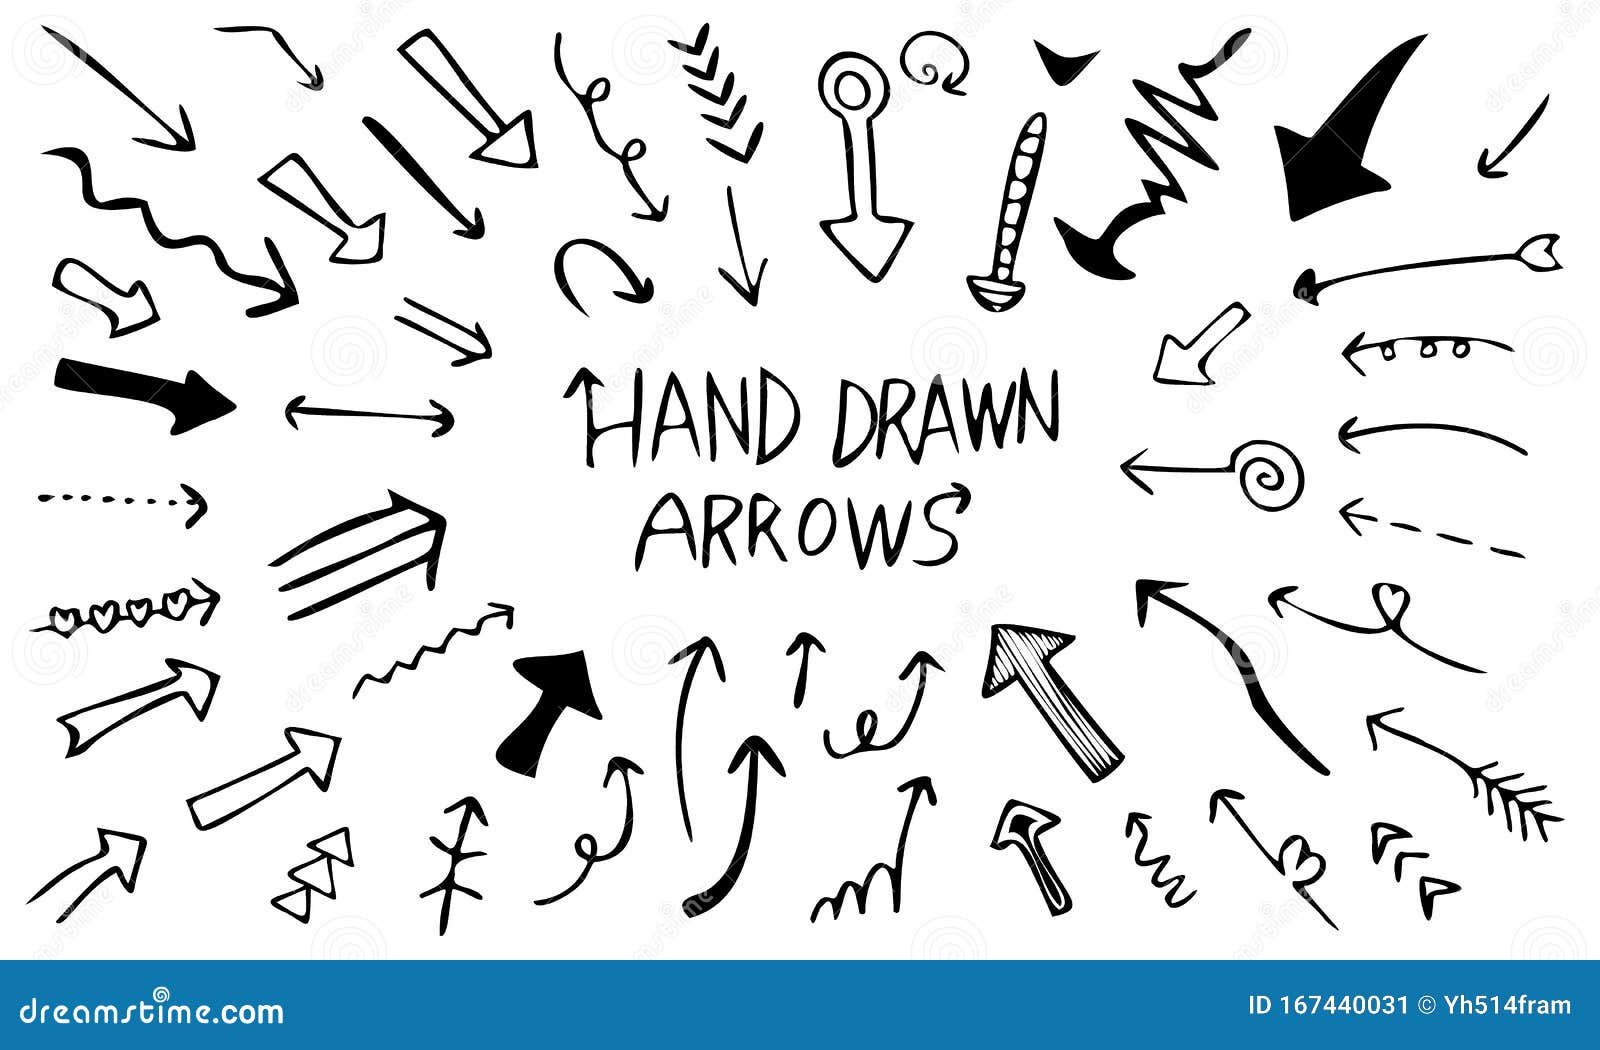 hand drawn arrows-with pen drawing